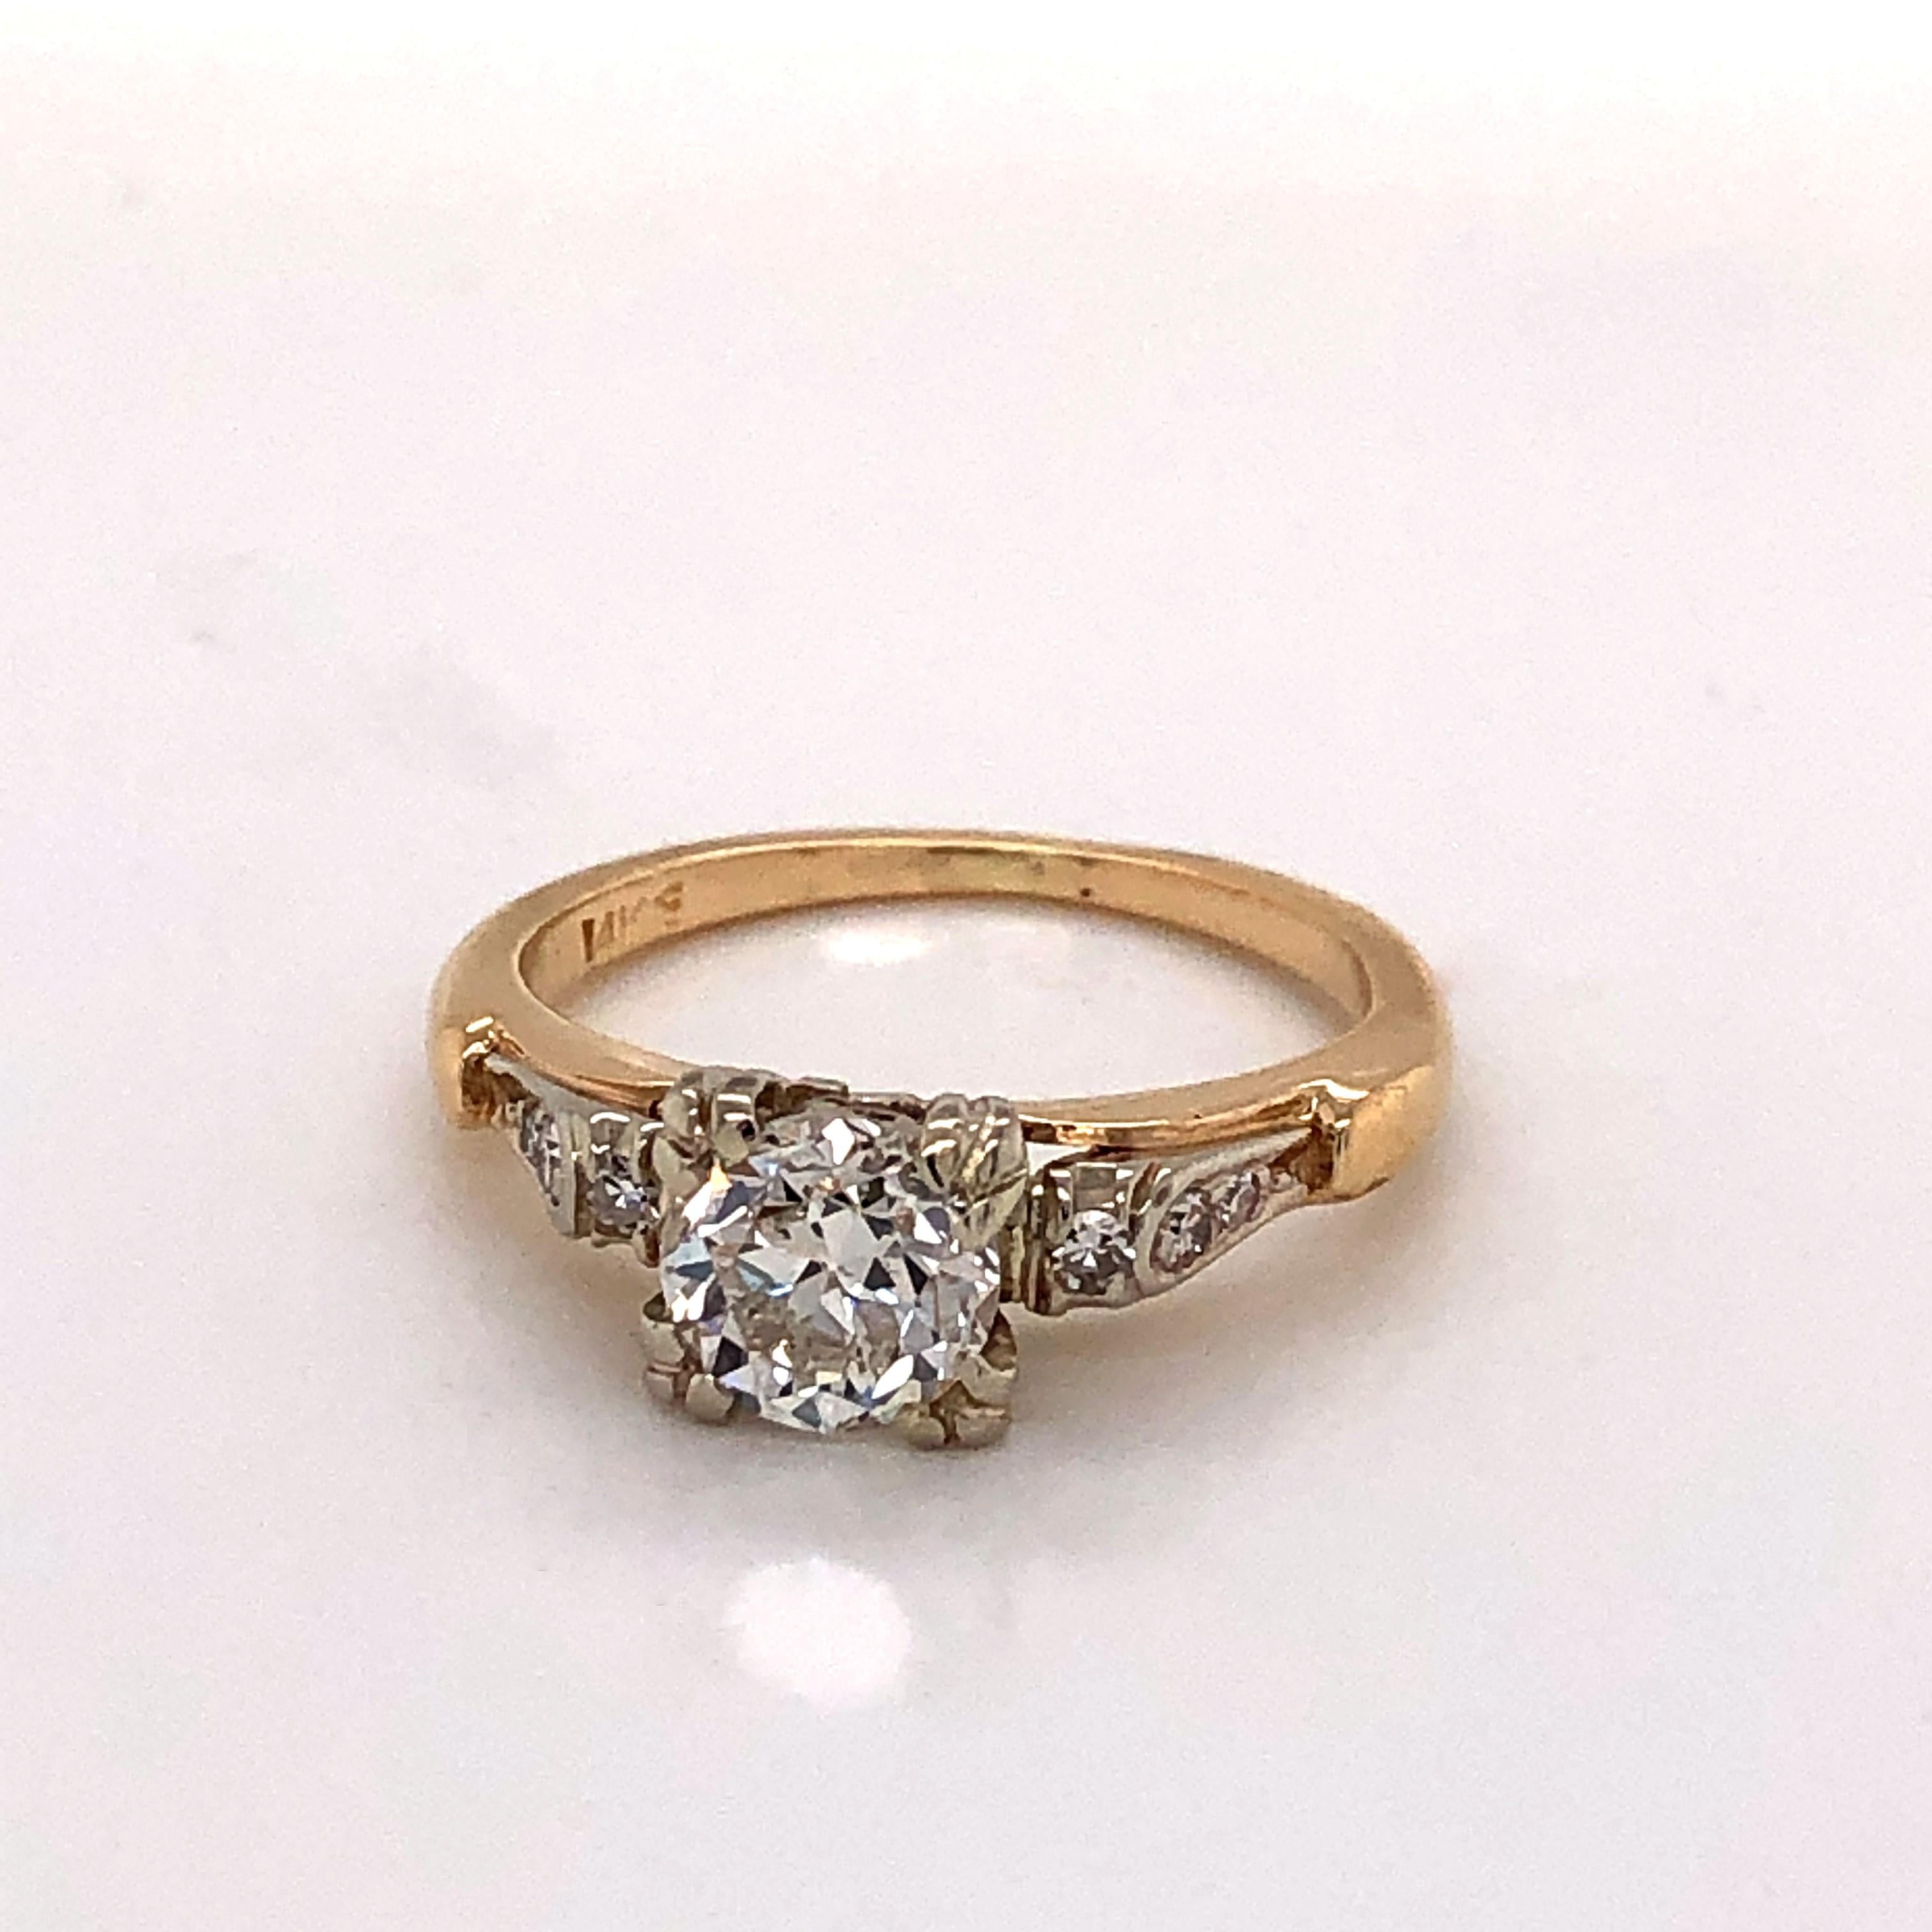 This elegant antique ring in fourteen carat yellow gold (14k) features a one carat (1 ct.) J/VS prong set round Miner's cut diamond flanked by baguettes of three smaller bezel set diamond accents on each side that graduate back along the band. Ring